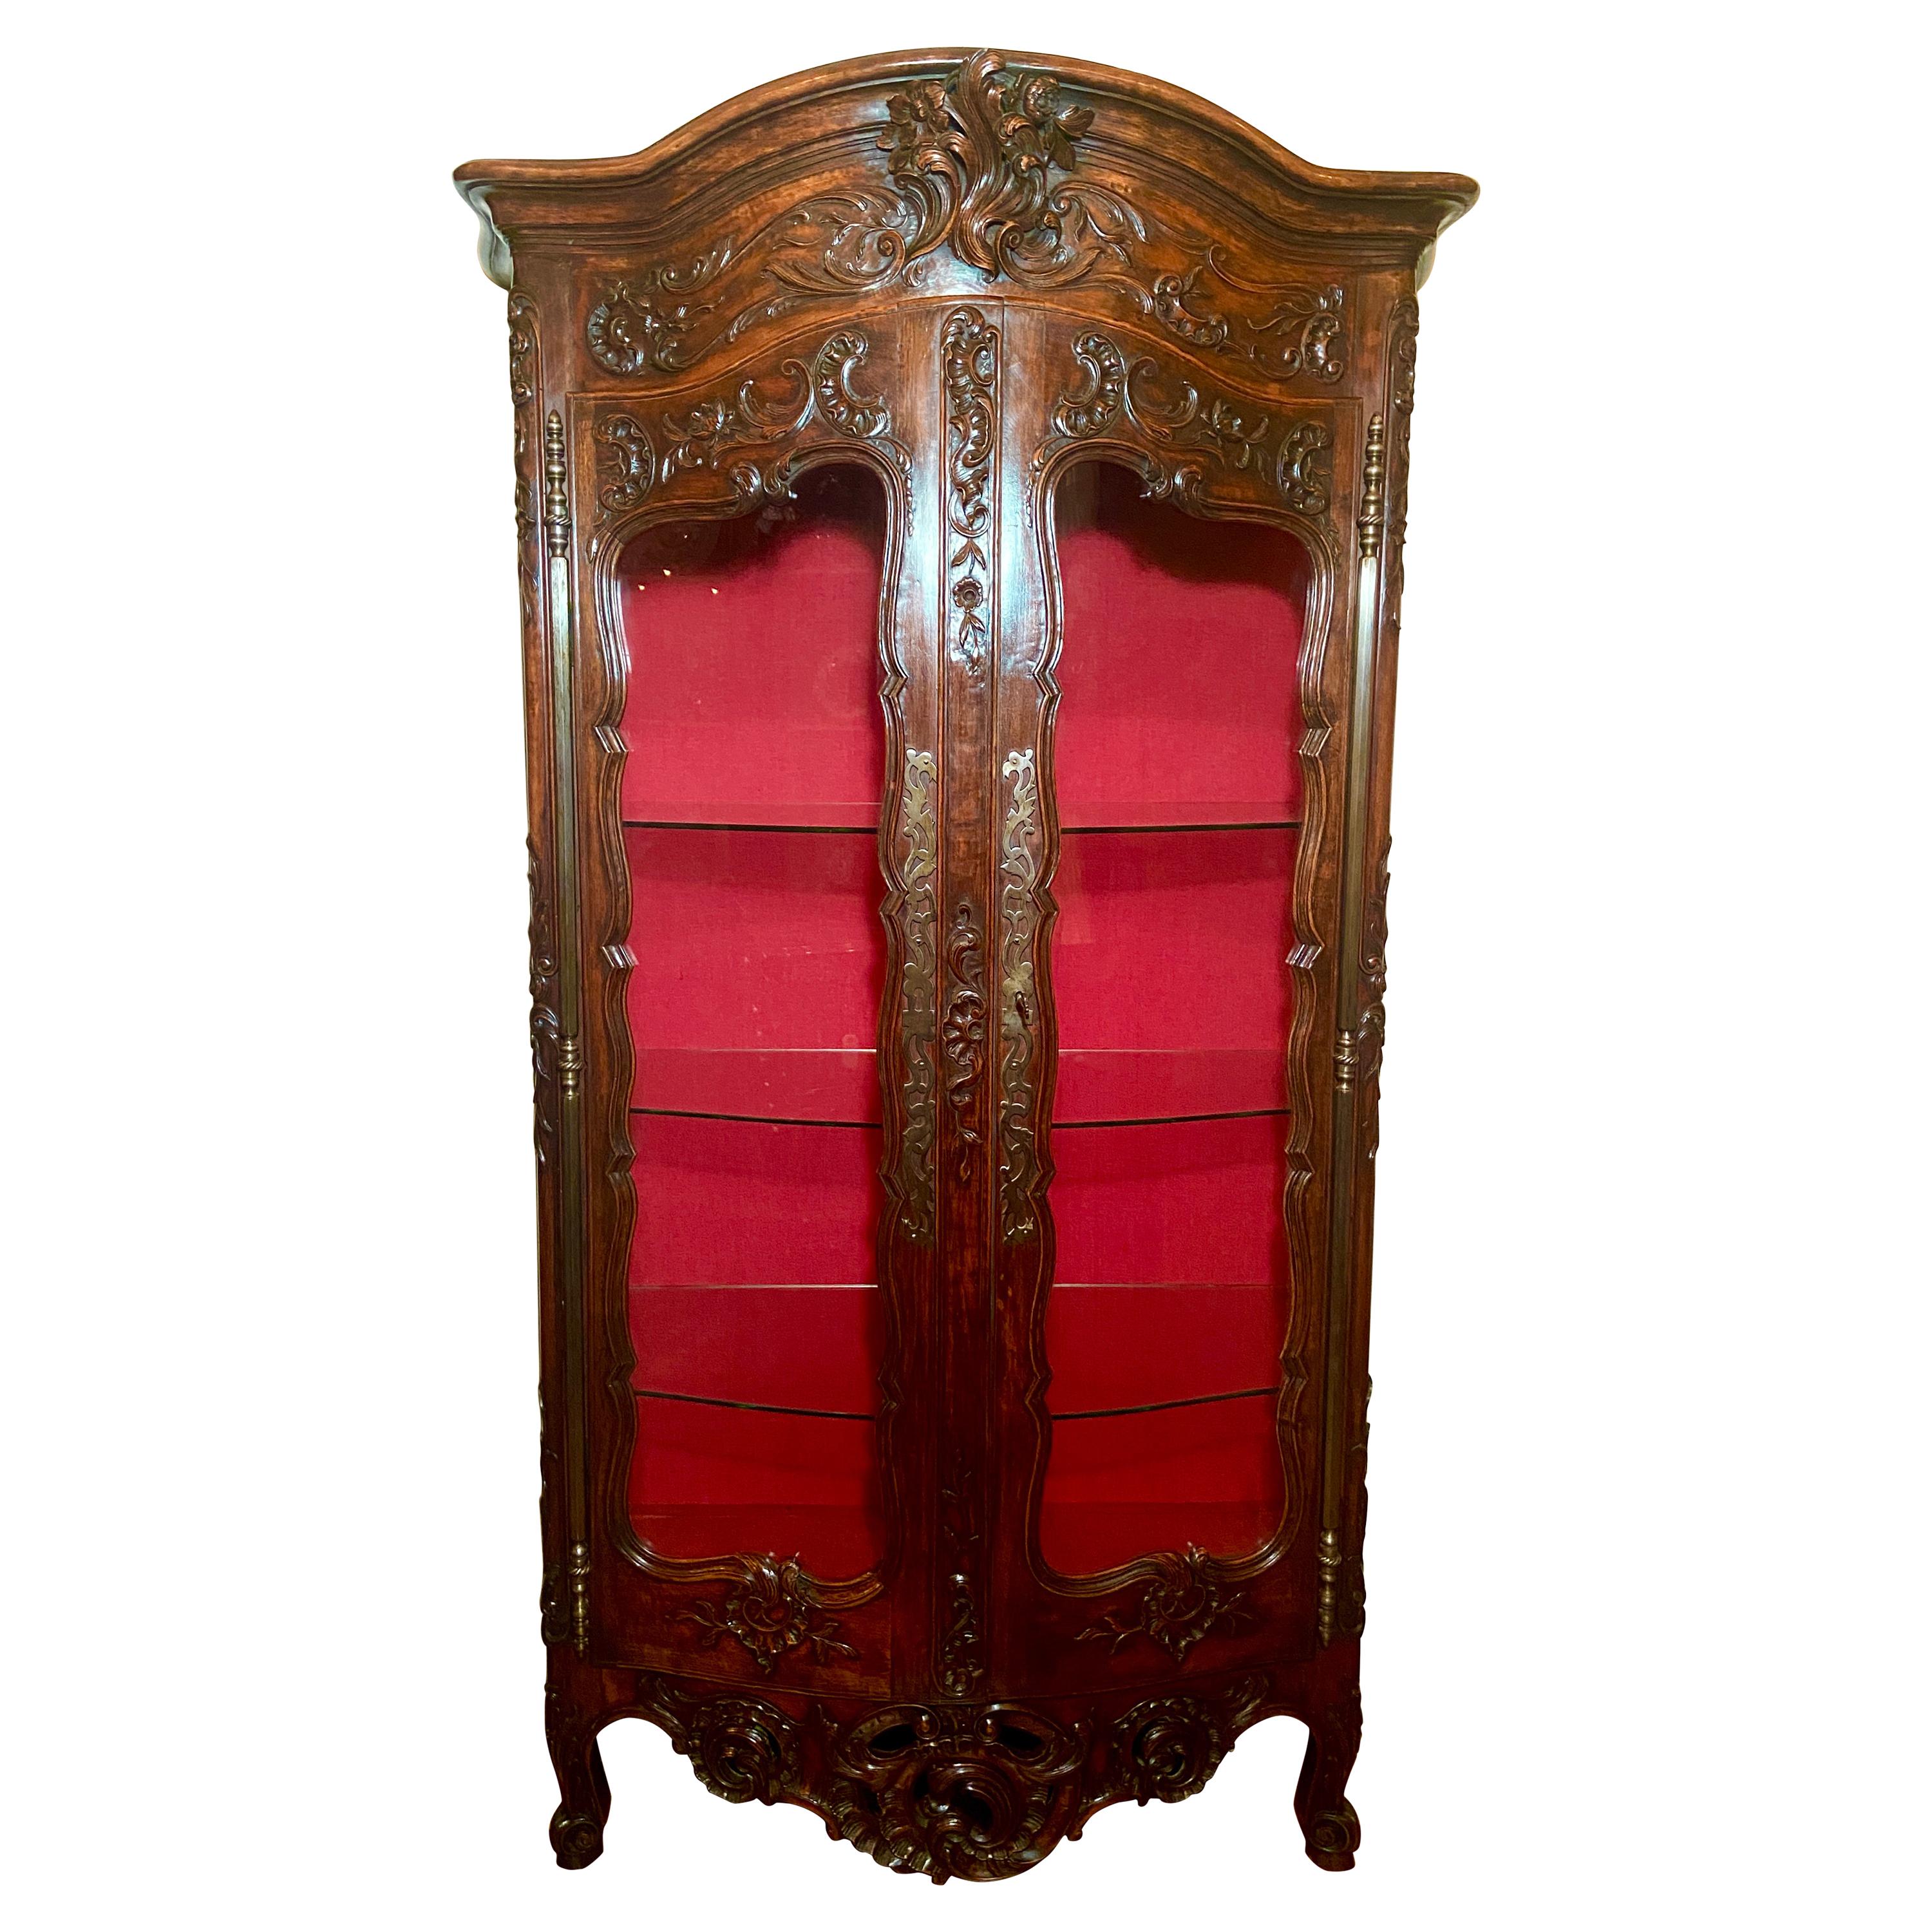 Antique French Provincial Carved Walnut Cabinet, Circa 1880